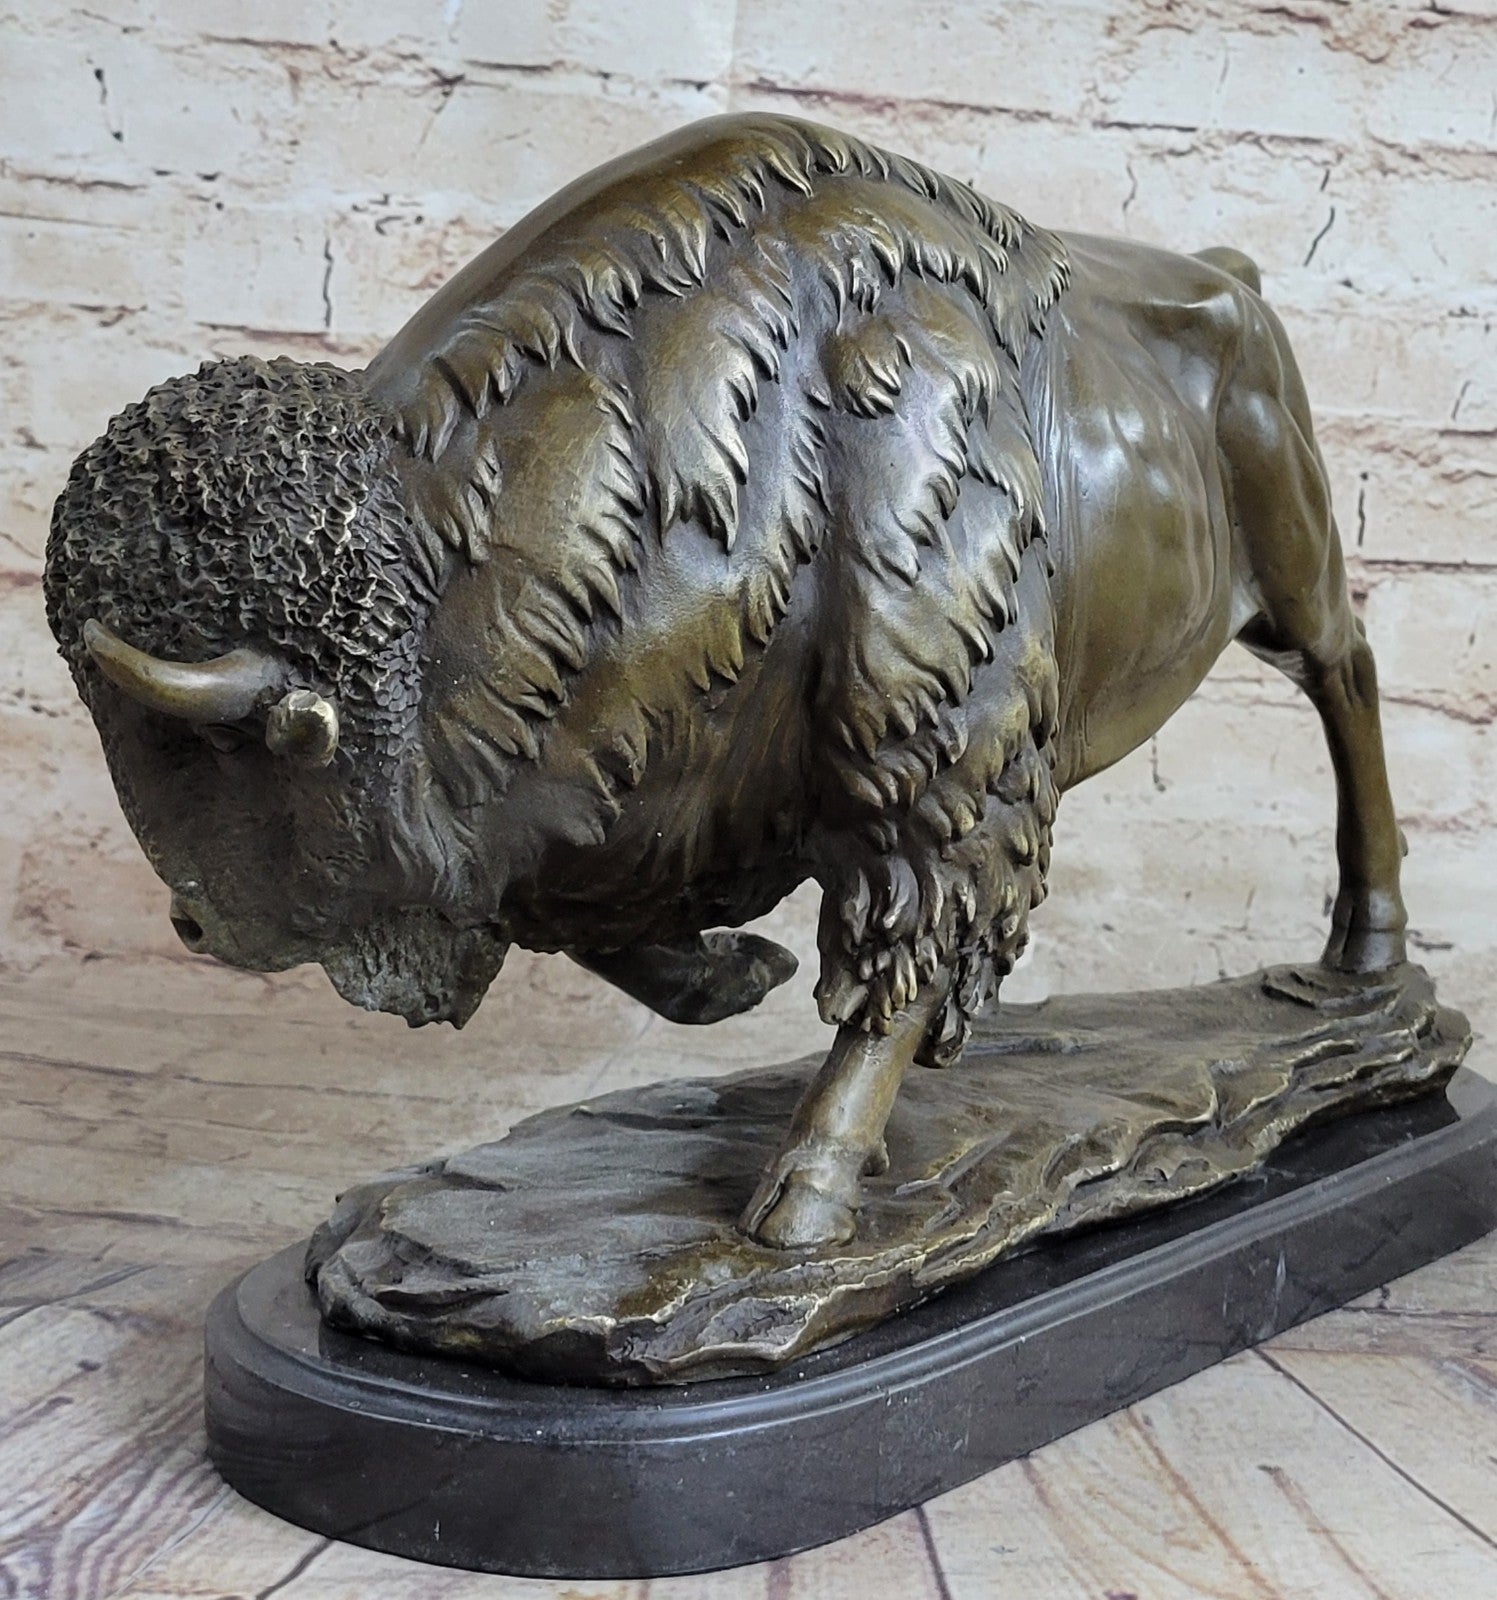 Handcrafted bronze sculpture SALE Marble Deco Art Bison Buffalo American Larg